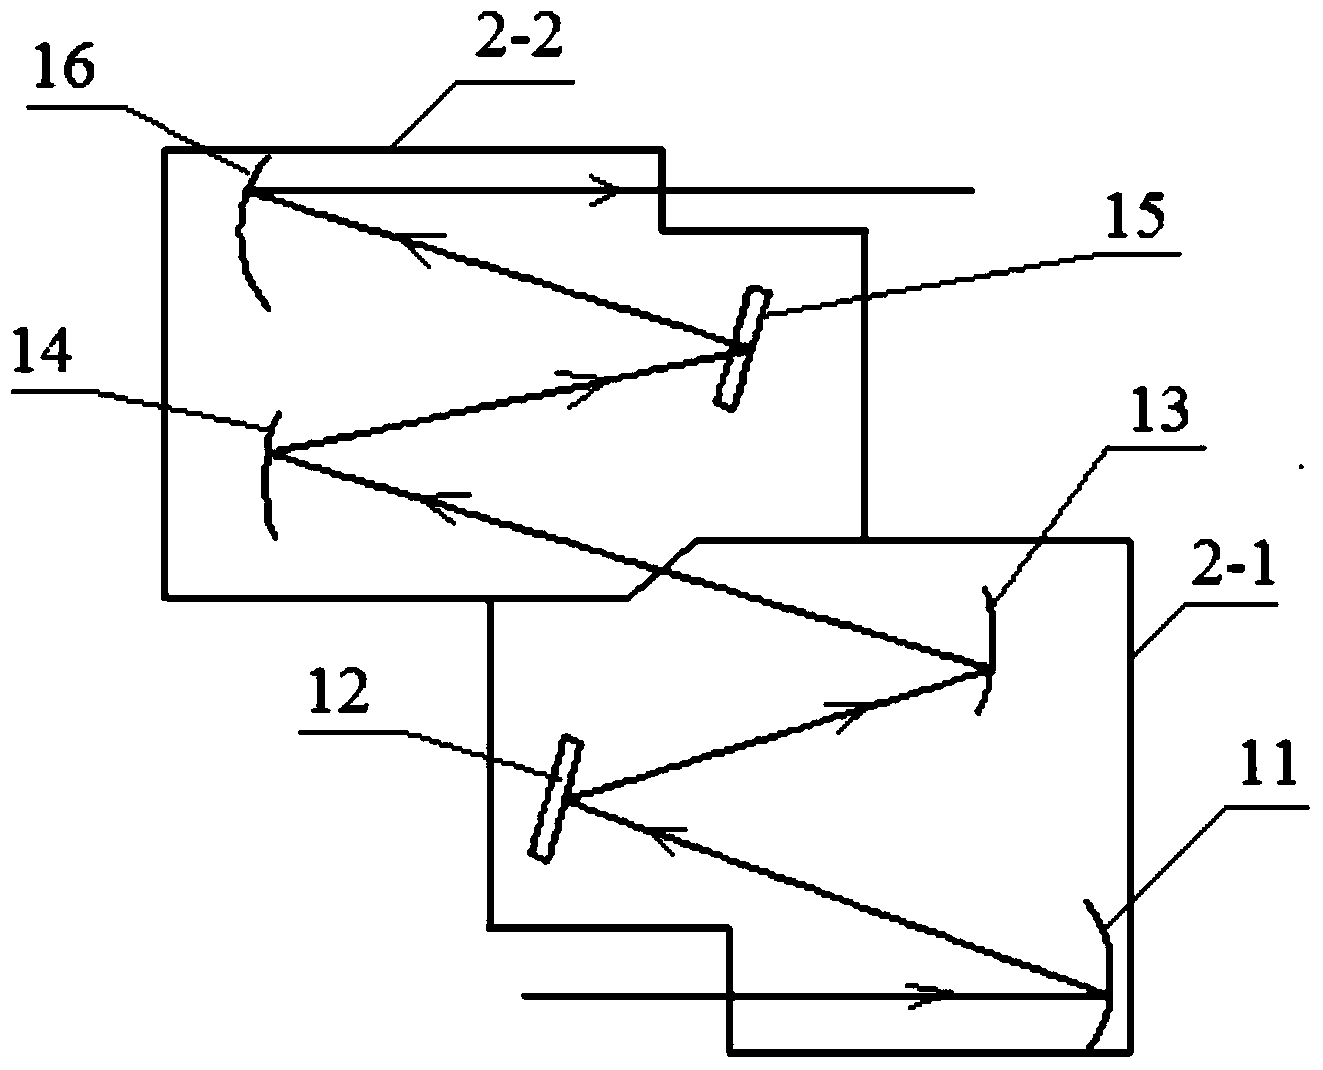 Double-grating beam splitting system packaging structure stable in stray light eliminating ability